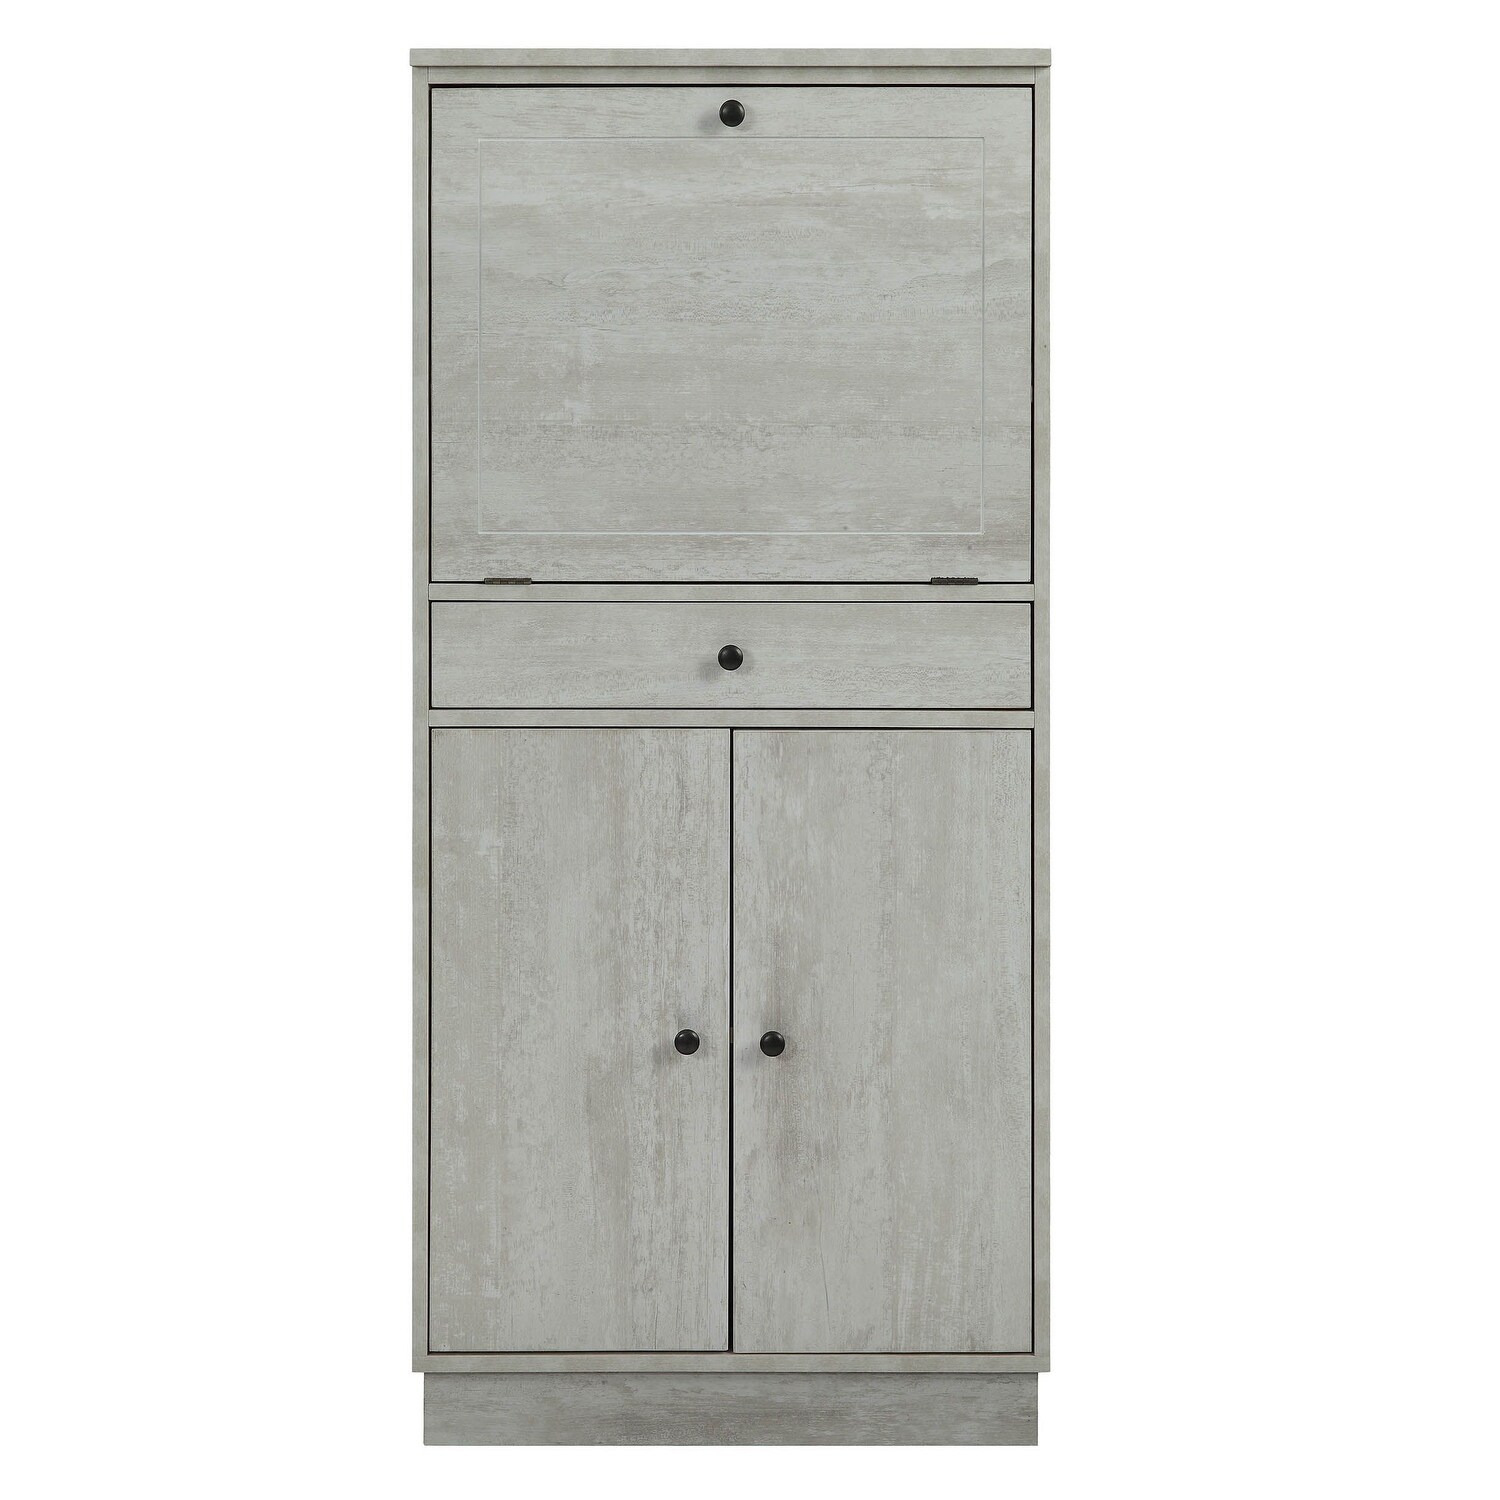 Wiesta Wine Cabinet in Antique White with Drawers for Living Room, Entryway, Bathroom